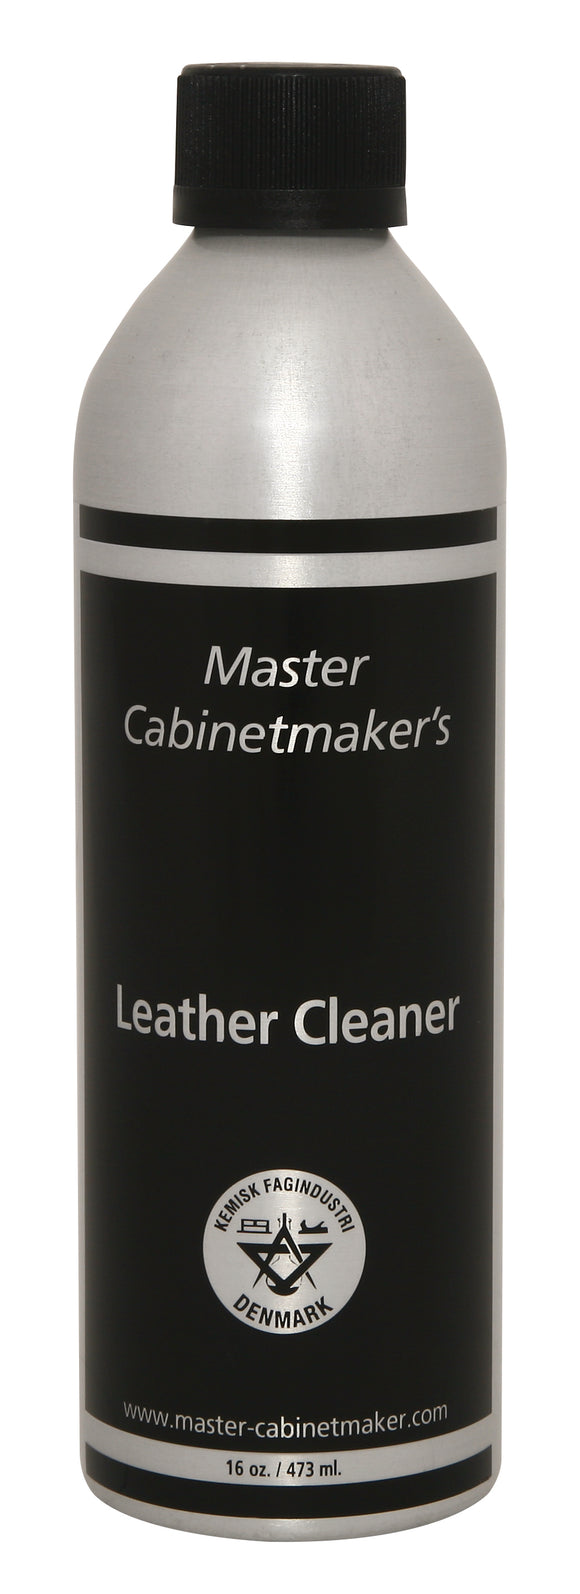 Master Cabinetmaker Leather Cleaner